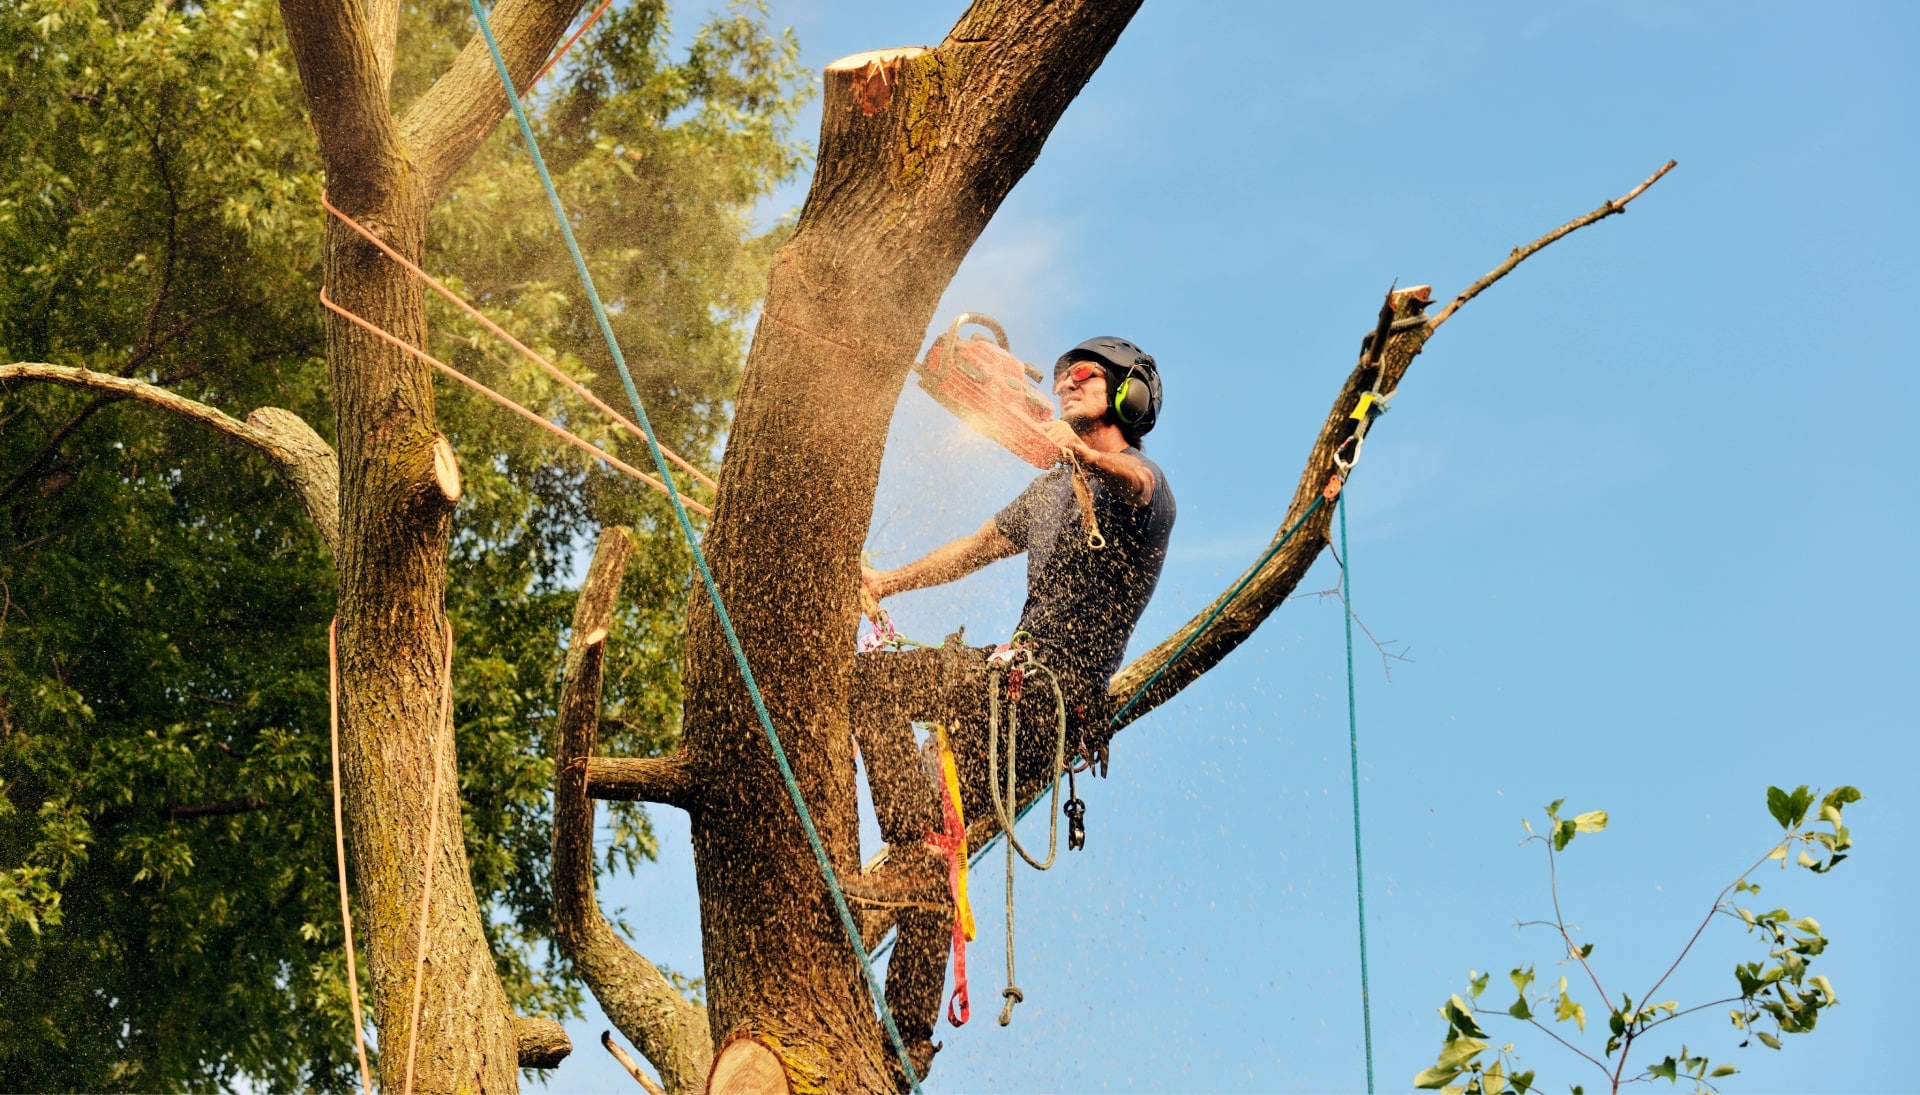 Jackson tree removal experts solve tree issues.